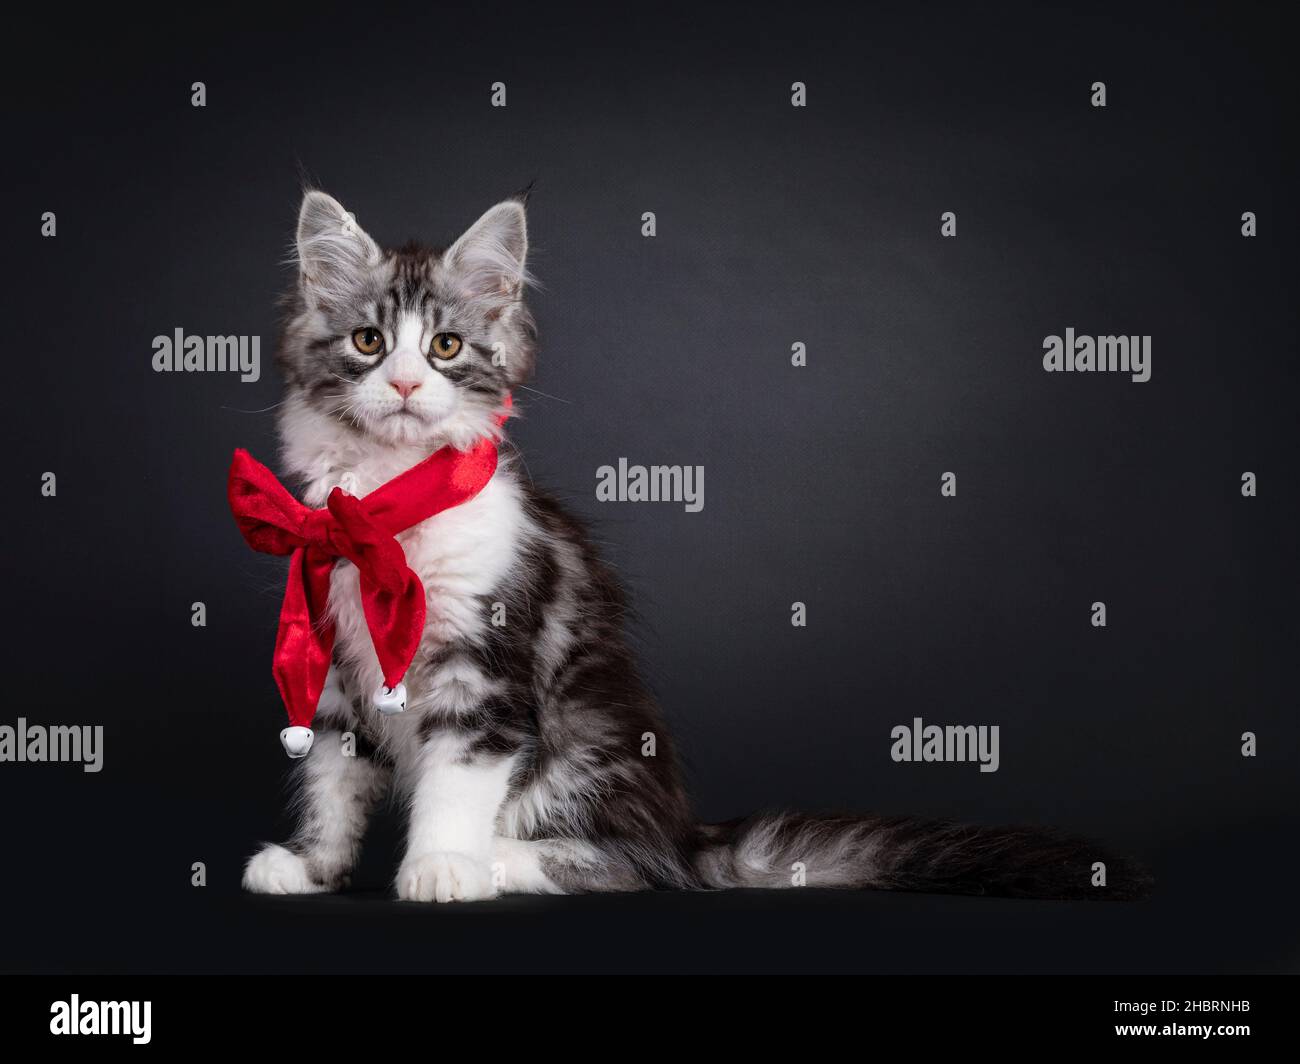 Adorable Maine Coon cat kitten, sitting facing front wearing bow tie around neck. Looking towards camera. Isolated on a black background copy Photo -